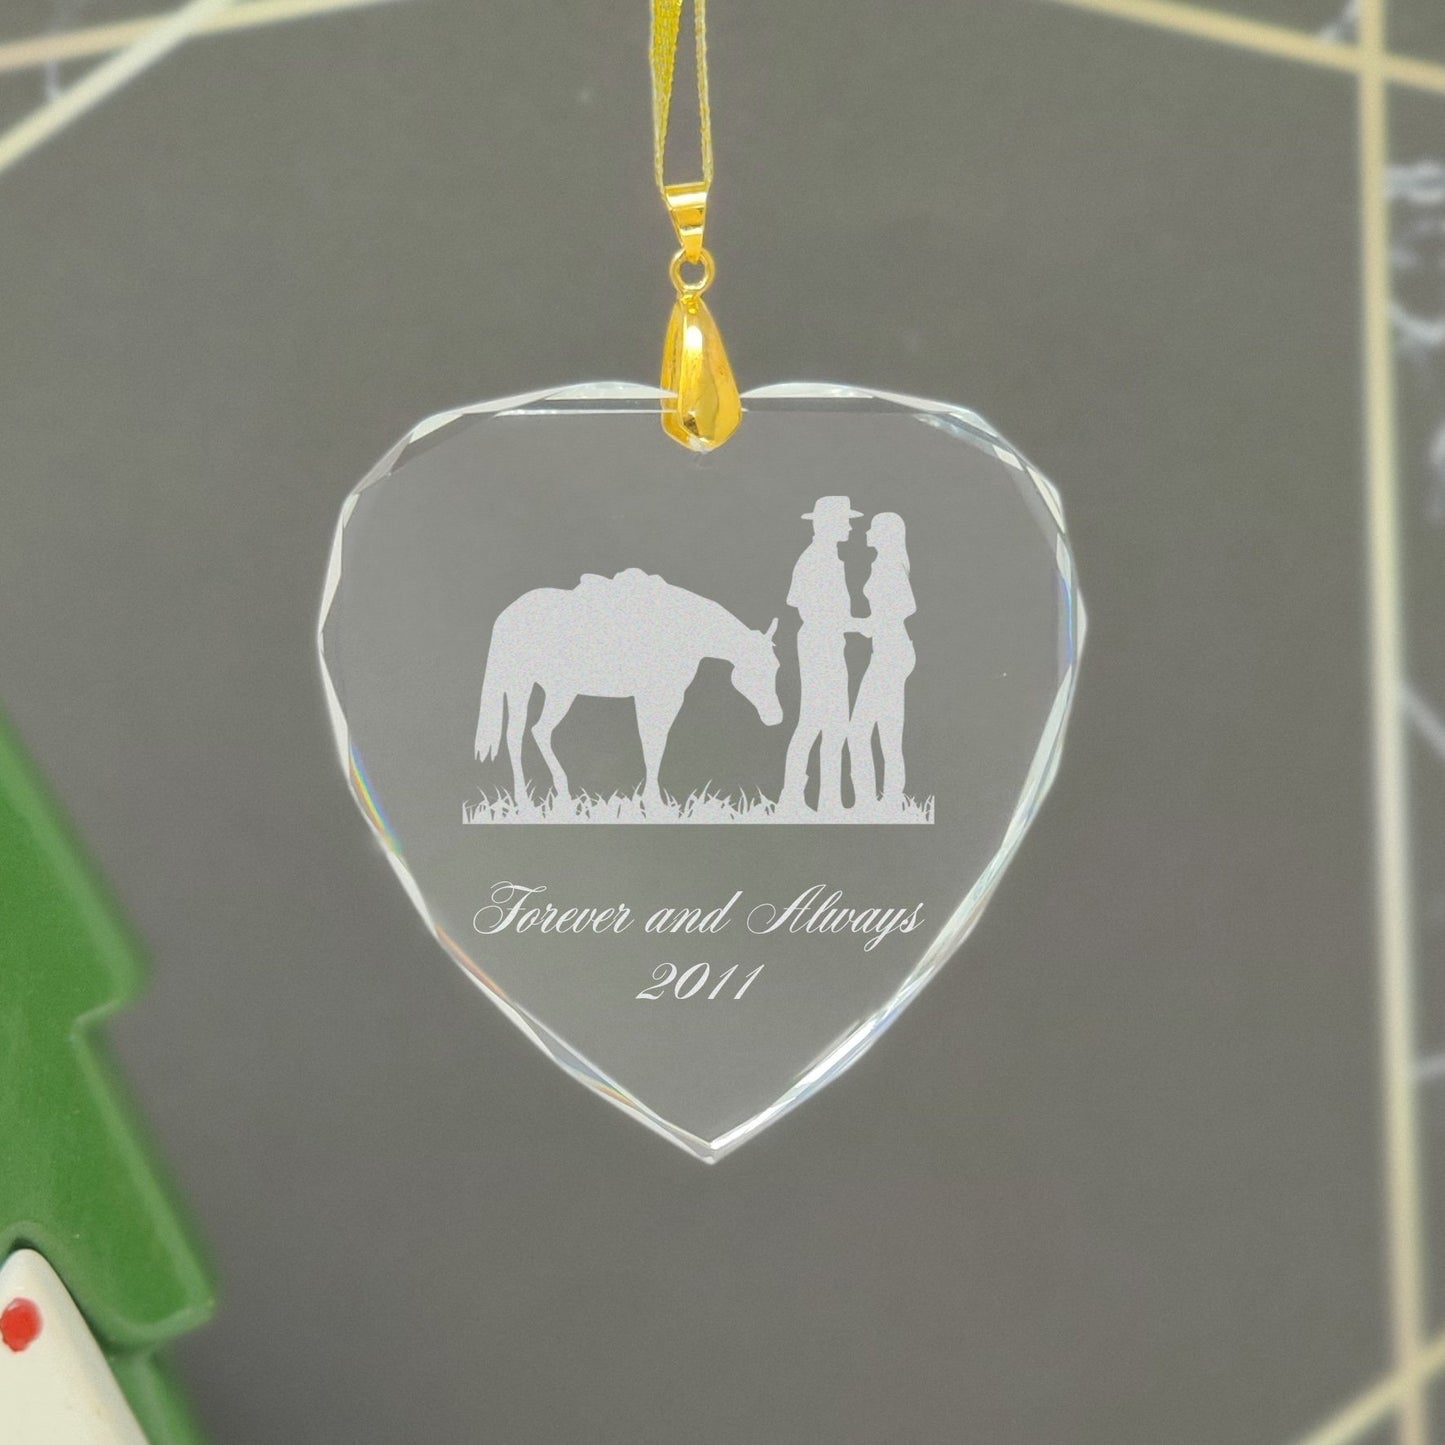 LaserGram Christmas Ornament, Chihuahua Dog, Personalized Engraving Included (Heart Shape)